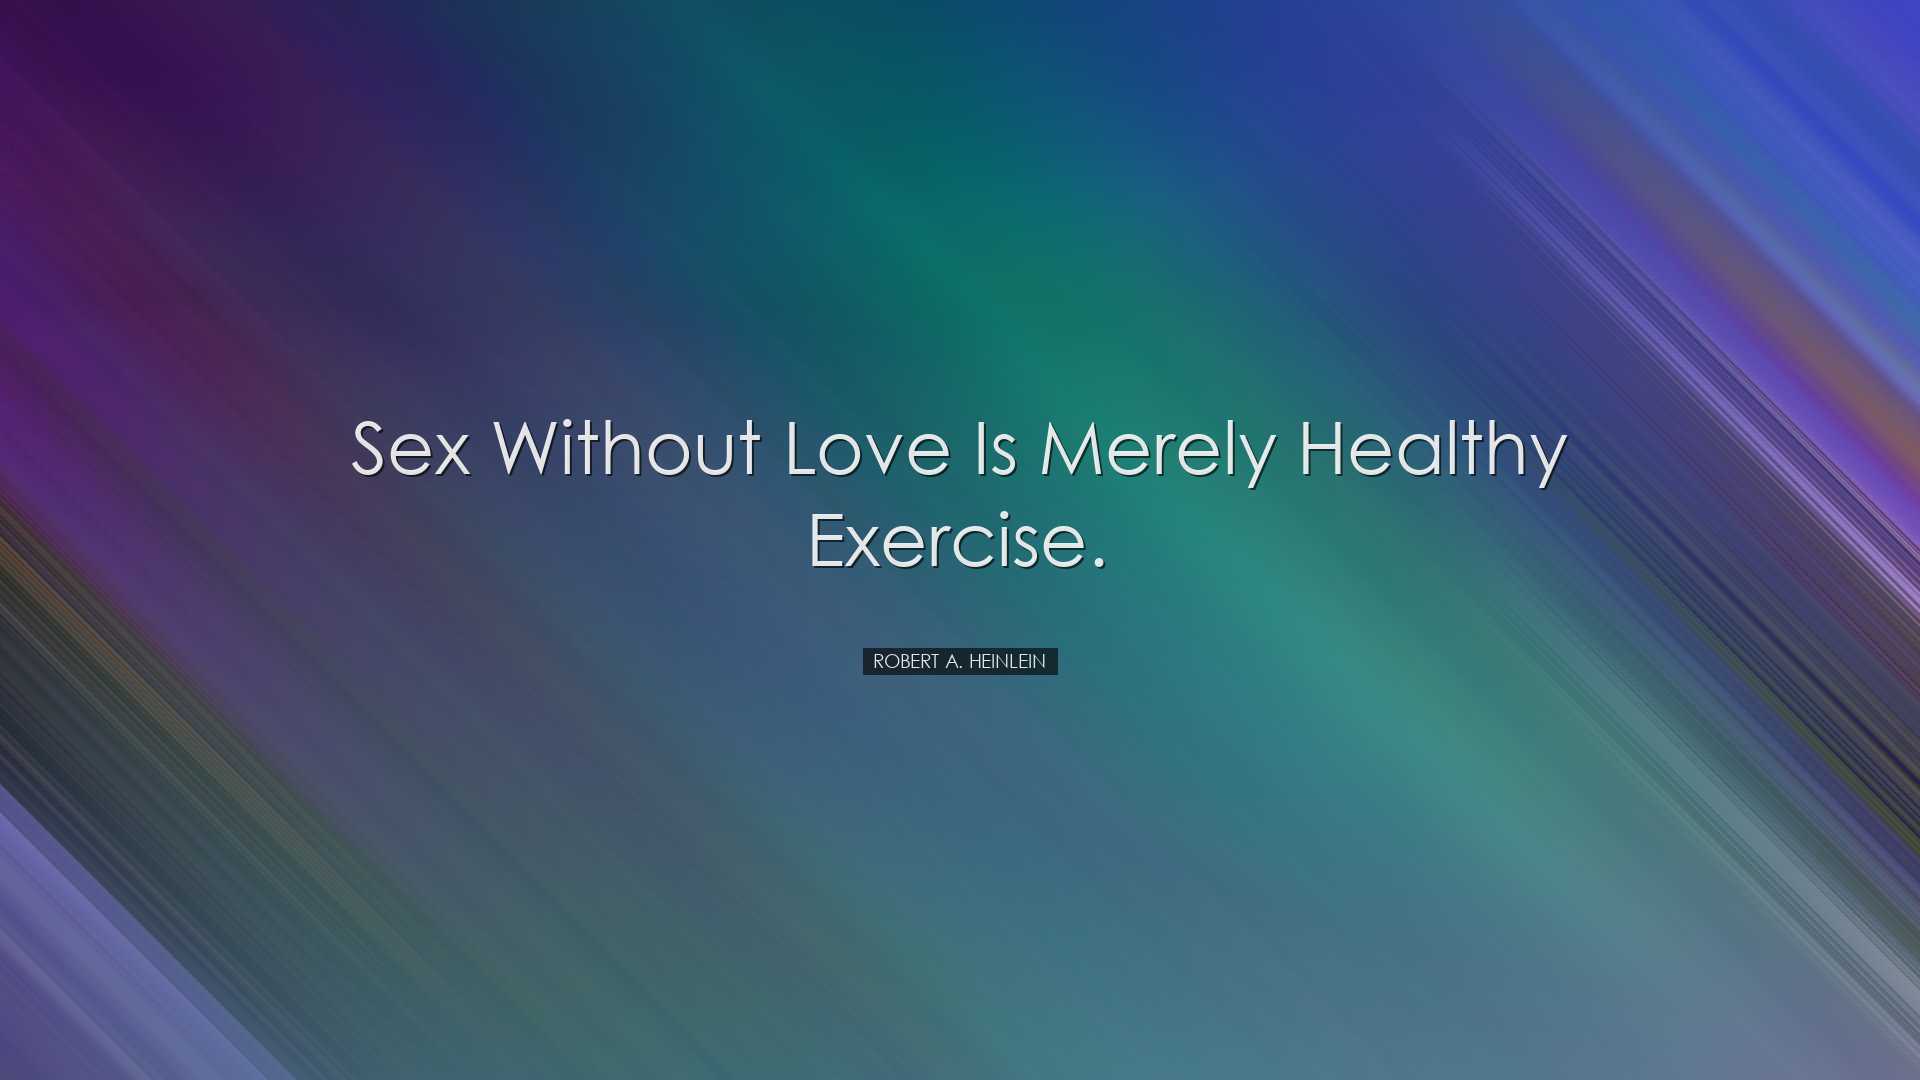 Sex without love is merely healthy exercise. - Robert A. Heinlein